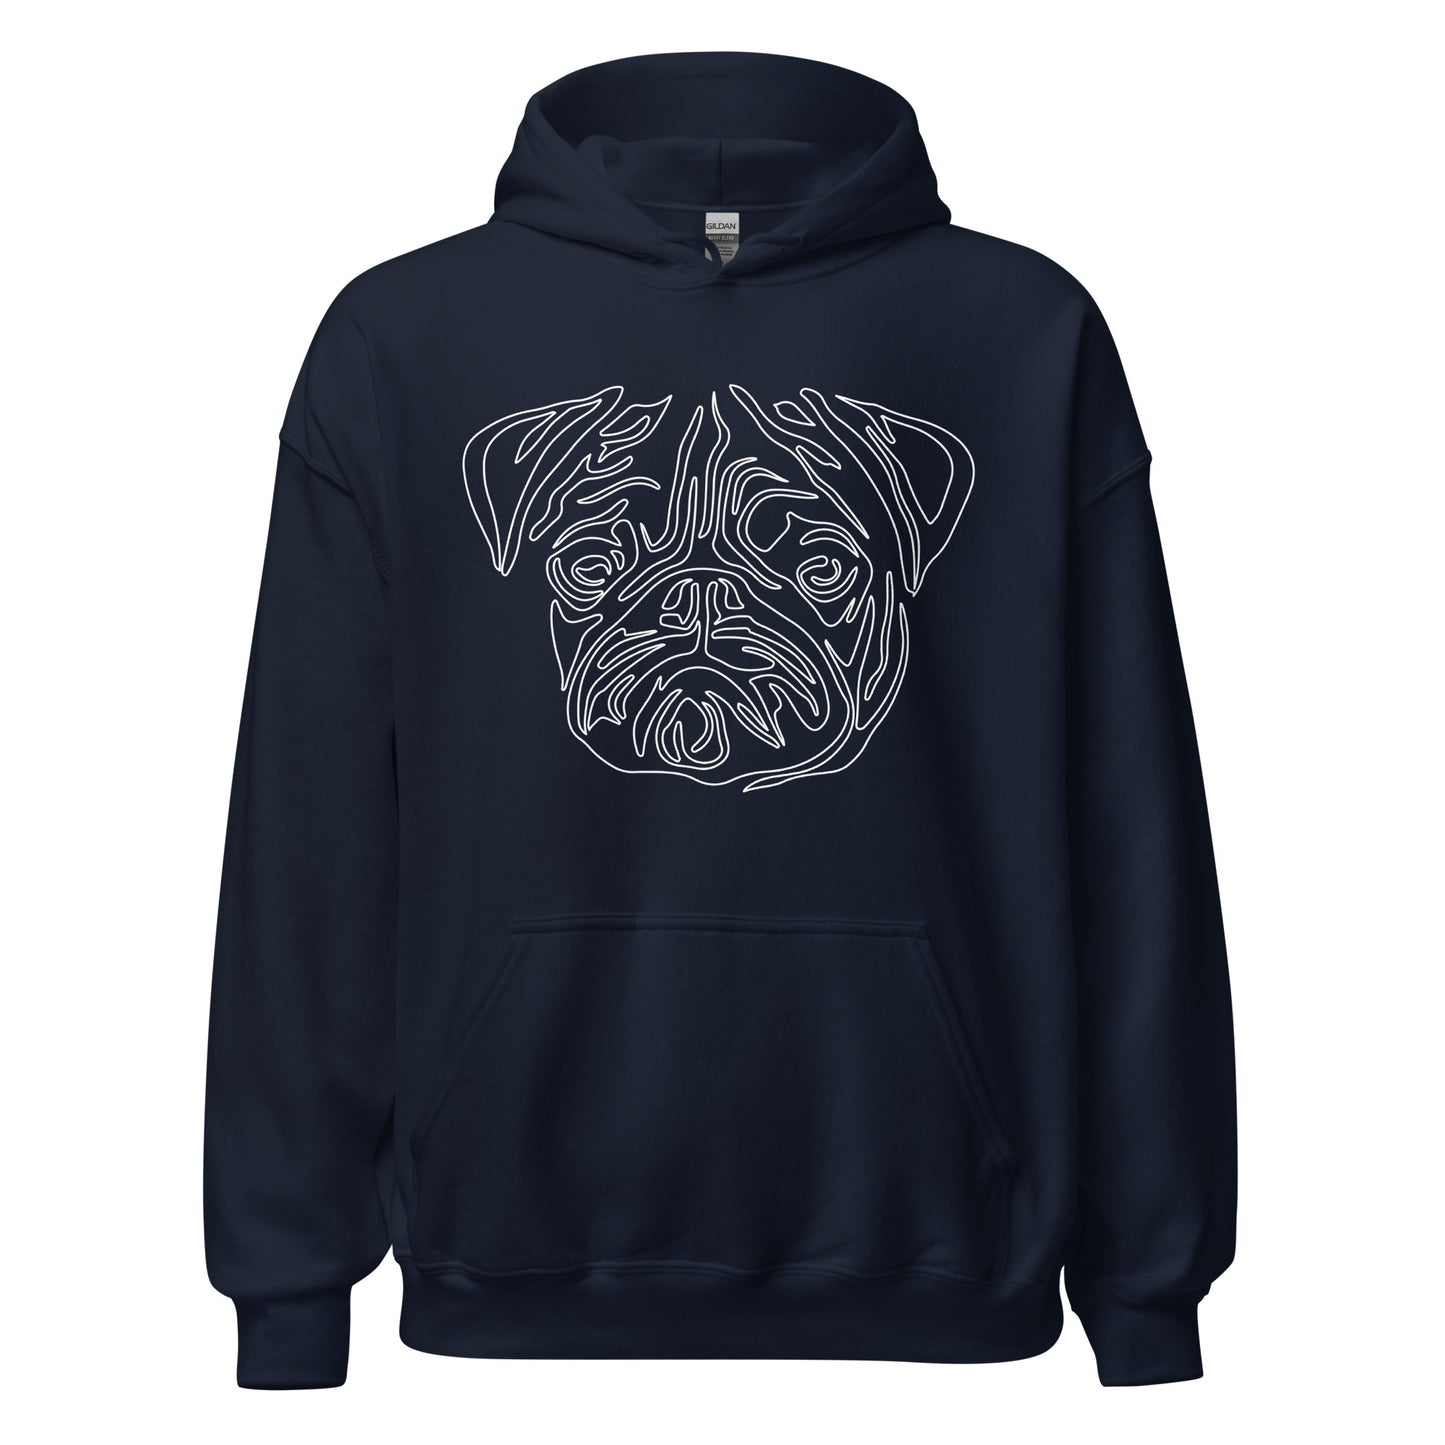 White line Pug face on unisex navy hoodie